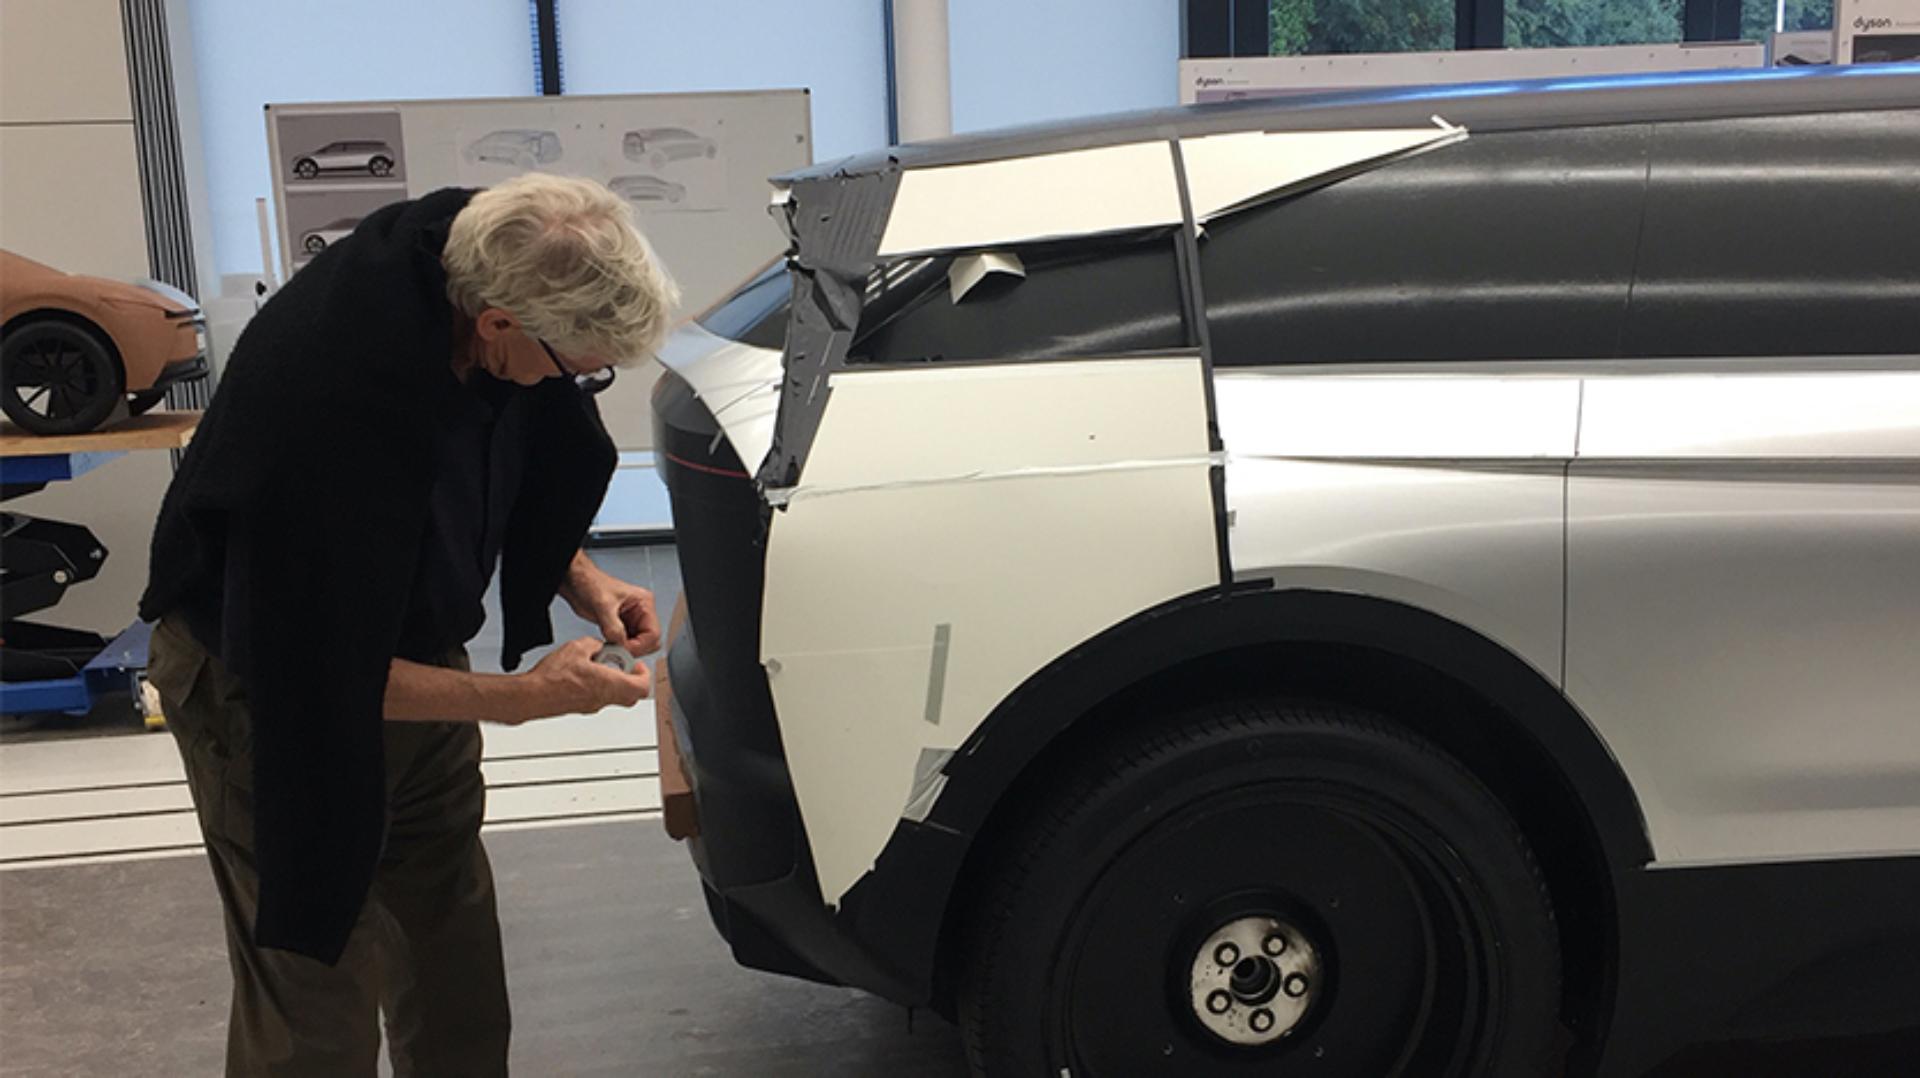 James Dyson working hands-on with the car project